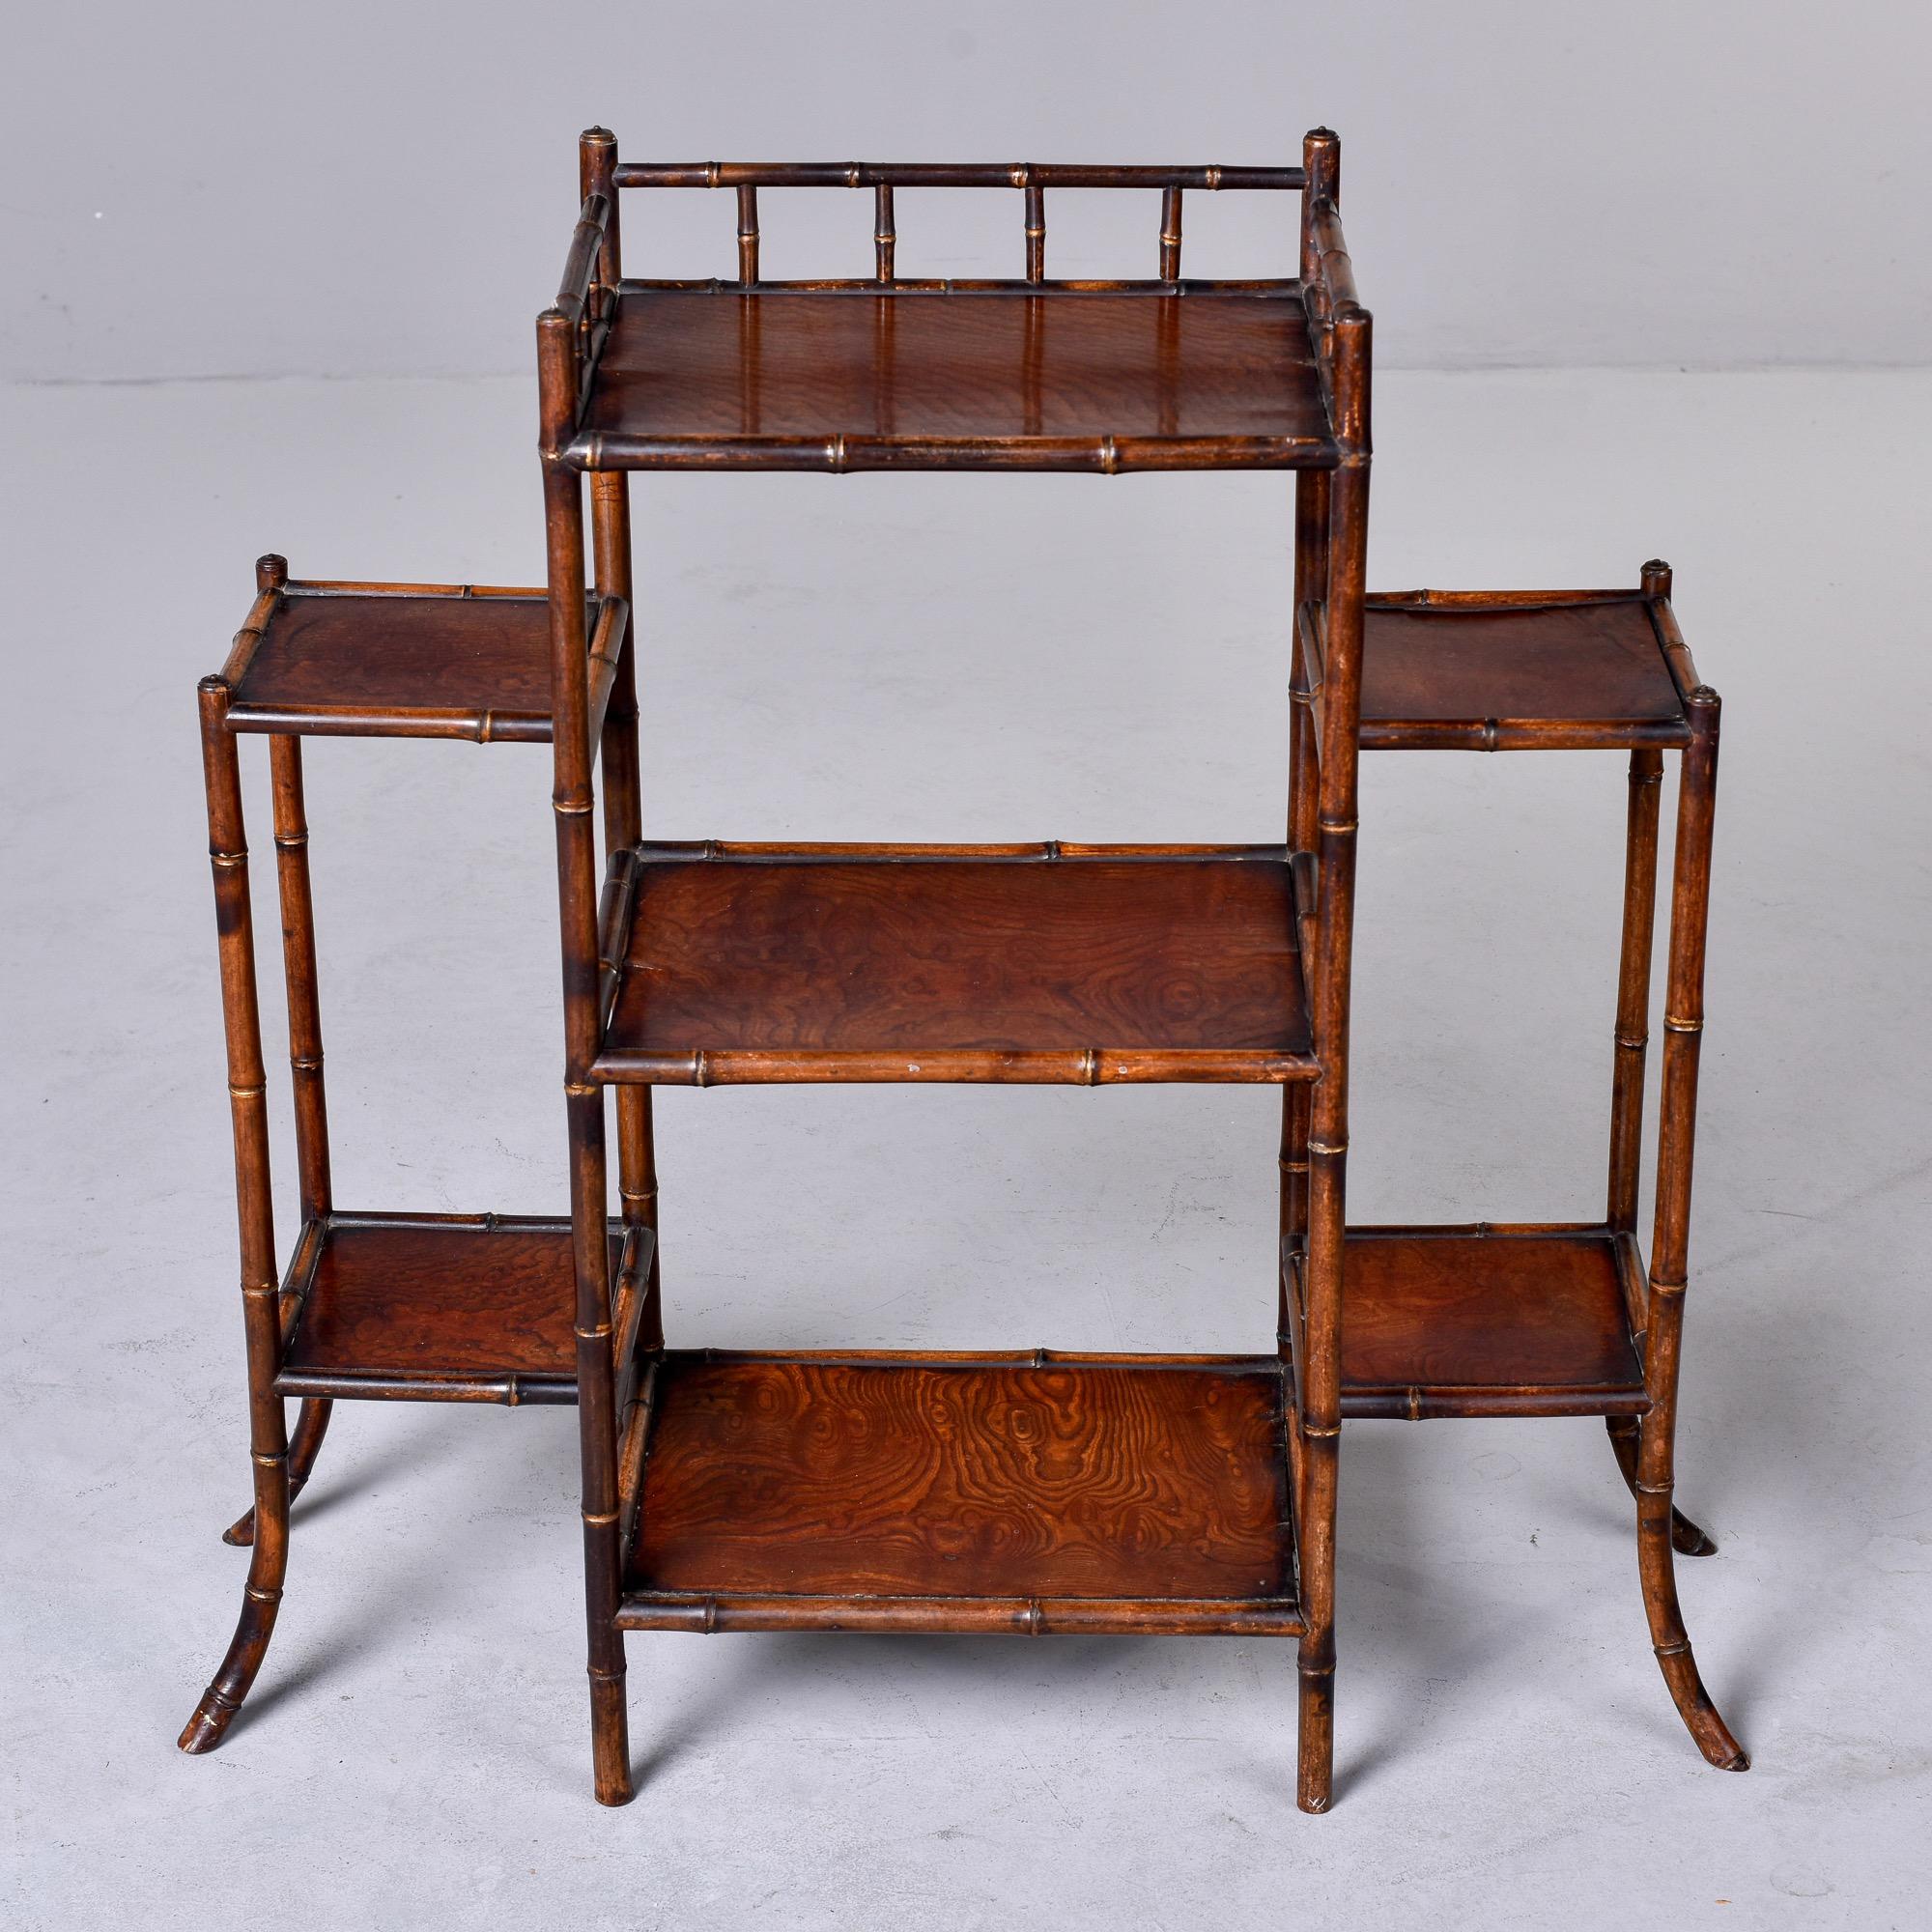 Circa 1910 three section English bamboo and wood etagere / display / plant stand. Versatile size at just under three feet tall and wide. Can be used to display plants, pottery, art or glass. Unknown maker. Very good antique condition with minor